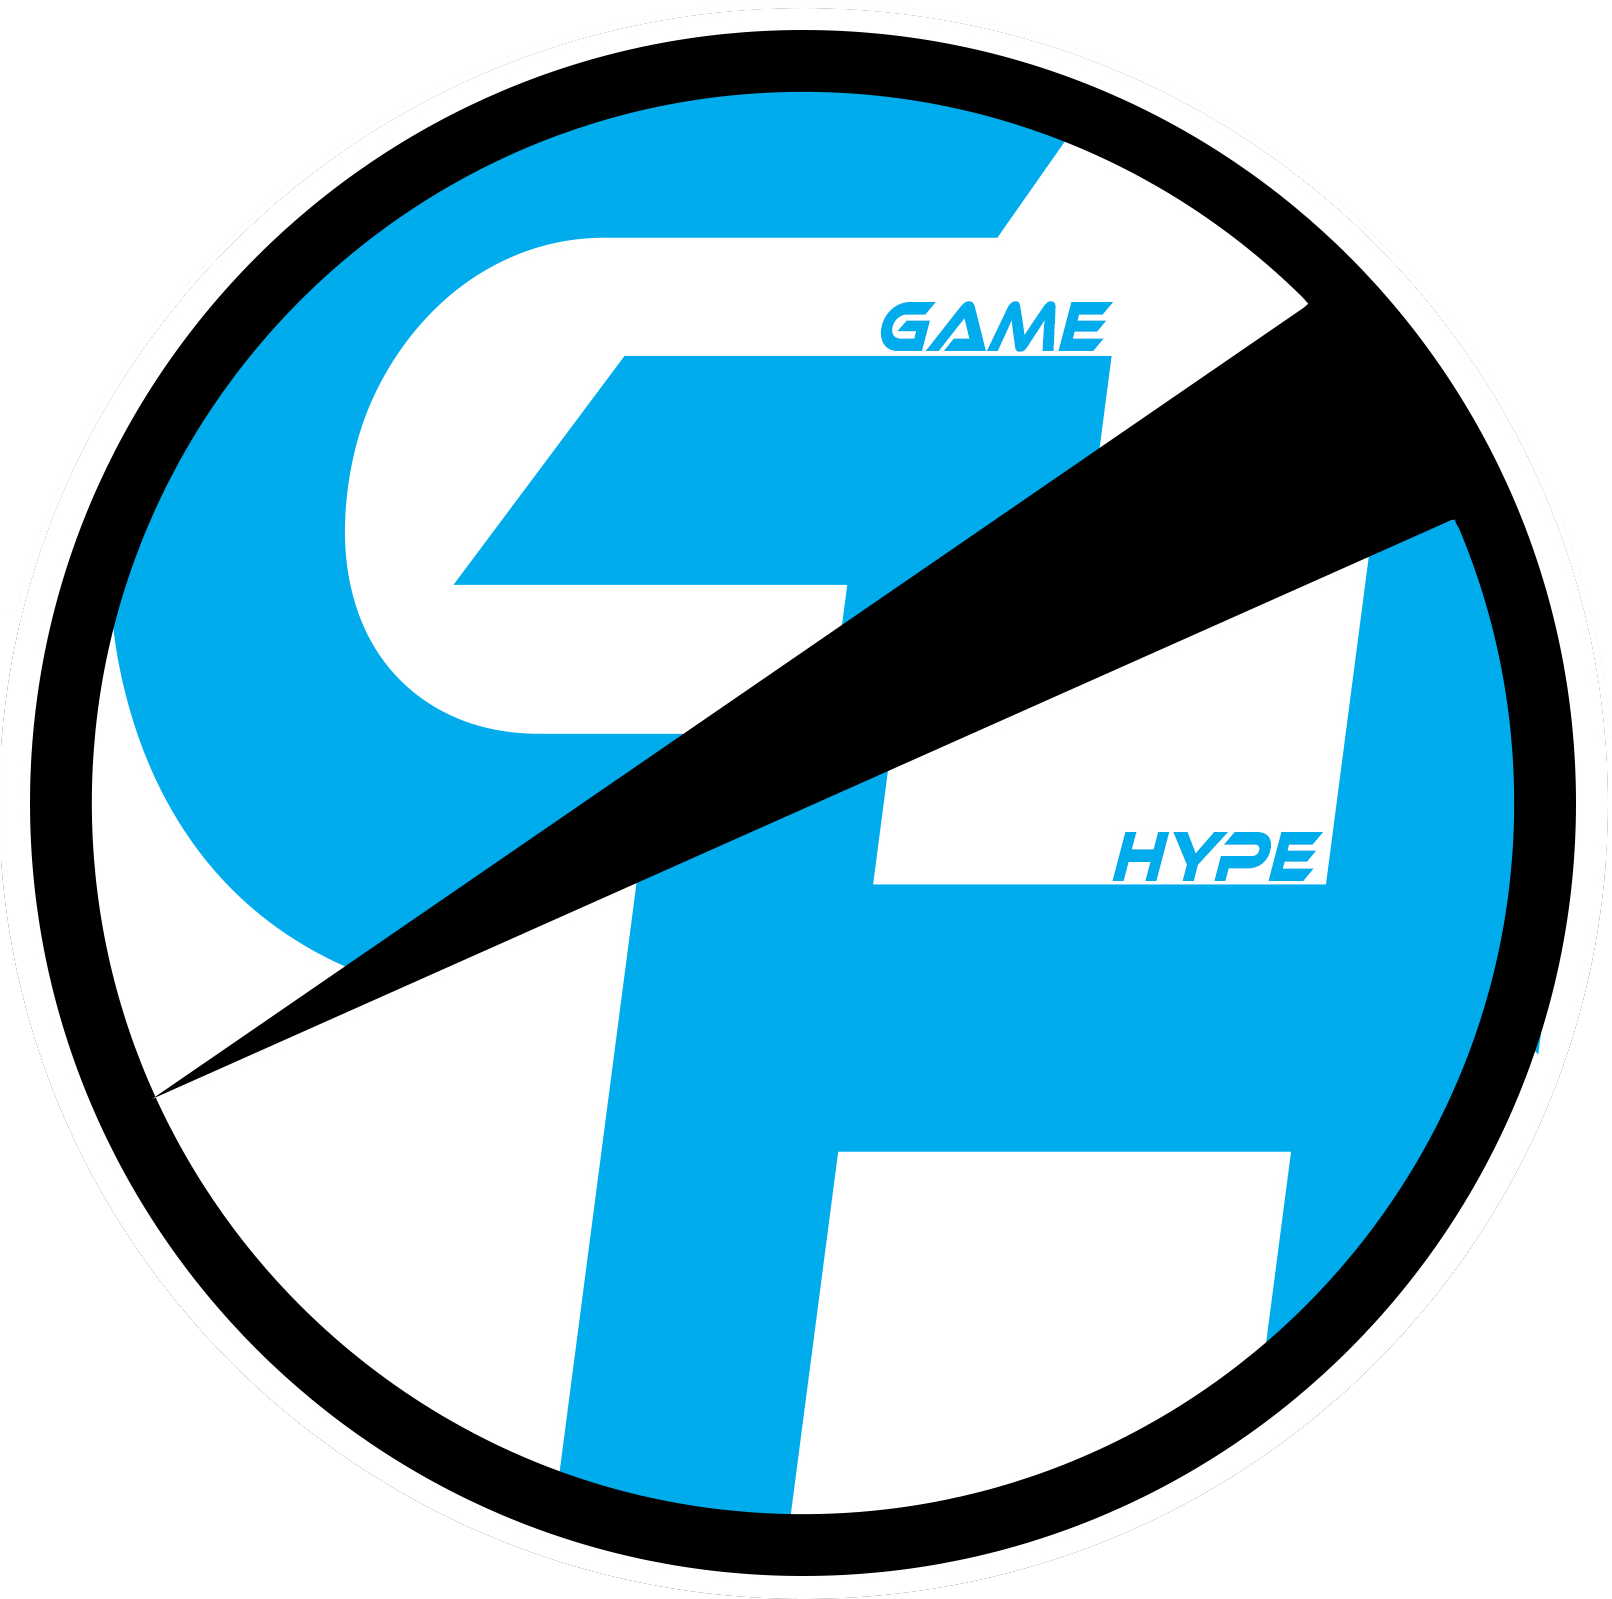 Game Hype - Game Hype (1611x1606)